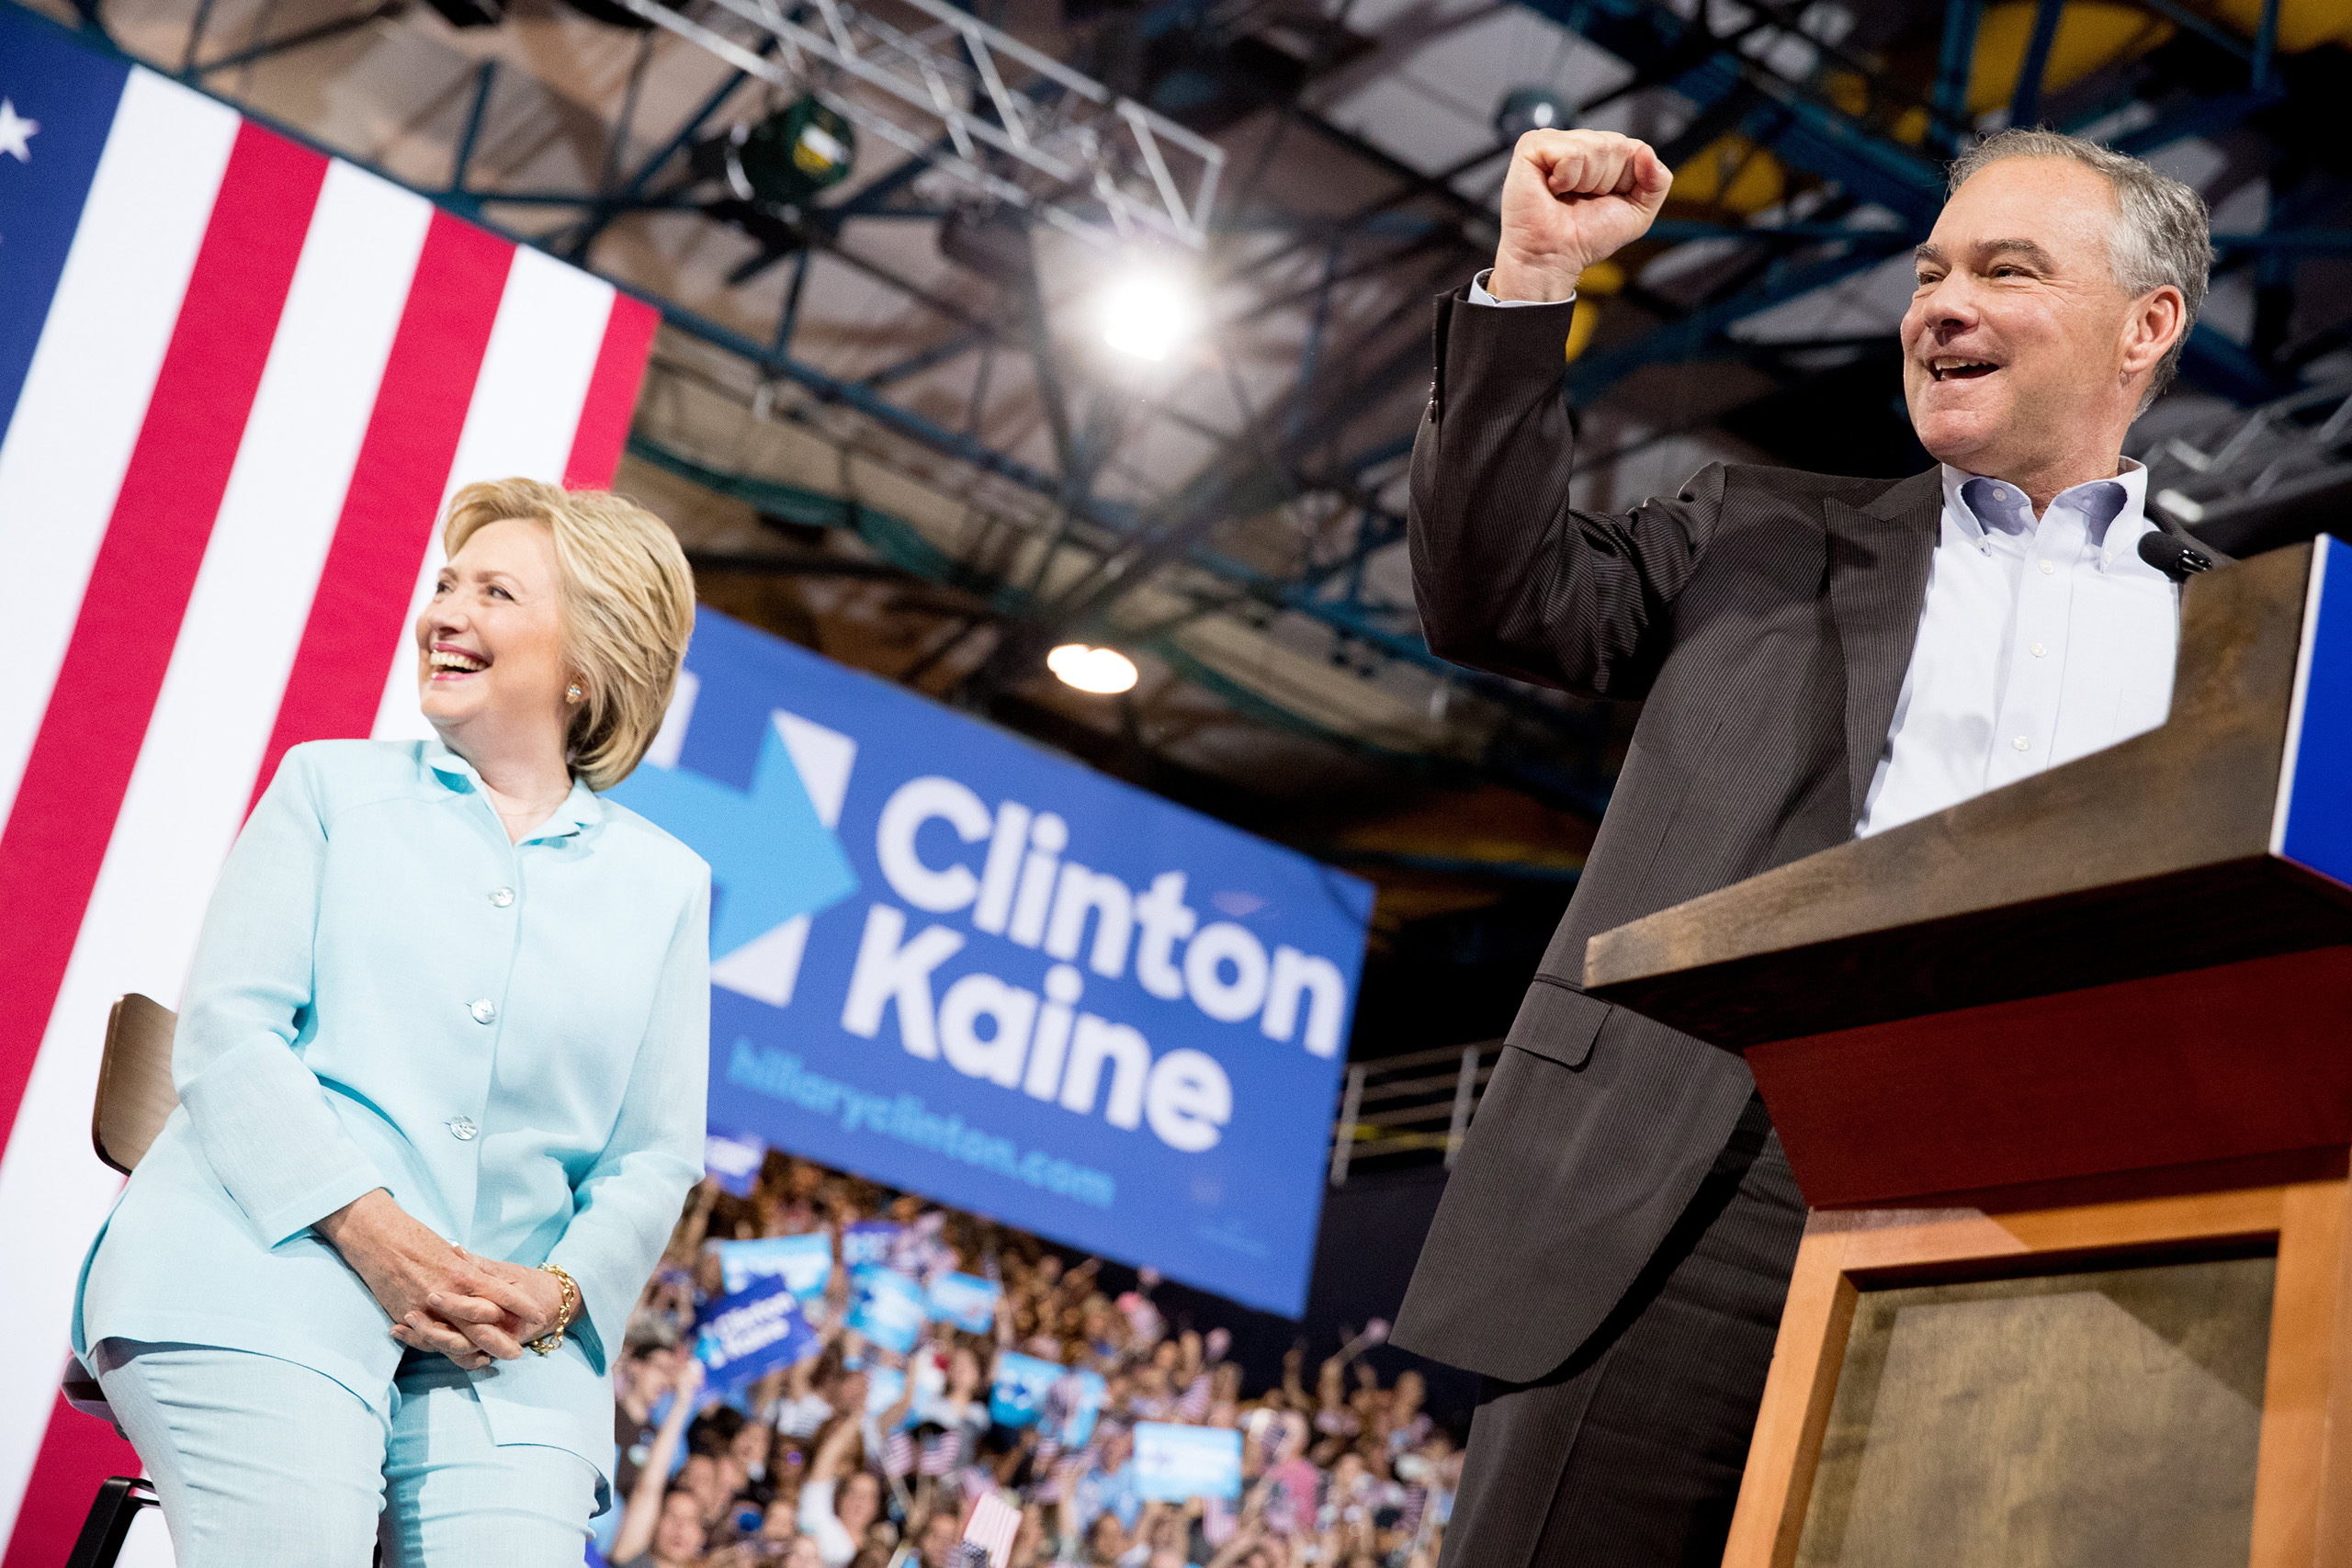 Sen. Tim Kaine, D-Va., right, accompanied by Democratic presidential candidate Hillary Clinton, left, speaks at a rally at Florida International University Panther Arena in Miami, Saturday, July 23, 2016. Clinton has chosen Kaine to be her running mate. (AP Photo/Andrew Harnik) (Andrew Harnik&mdash;AP)